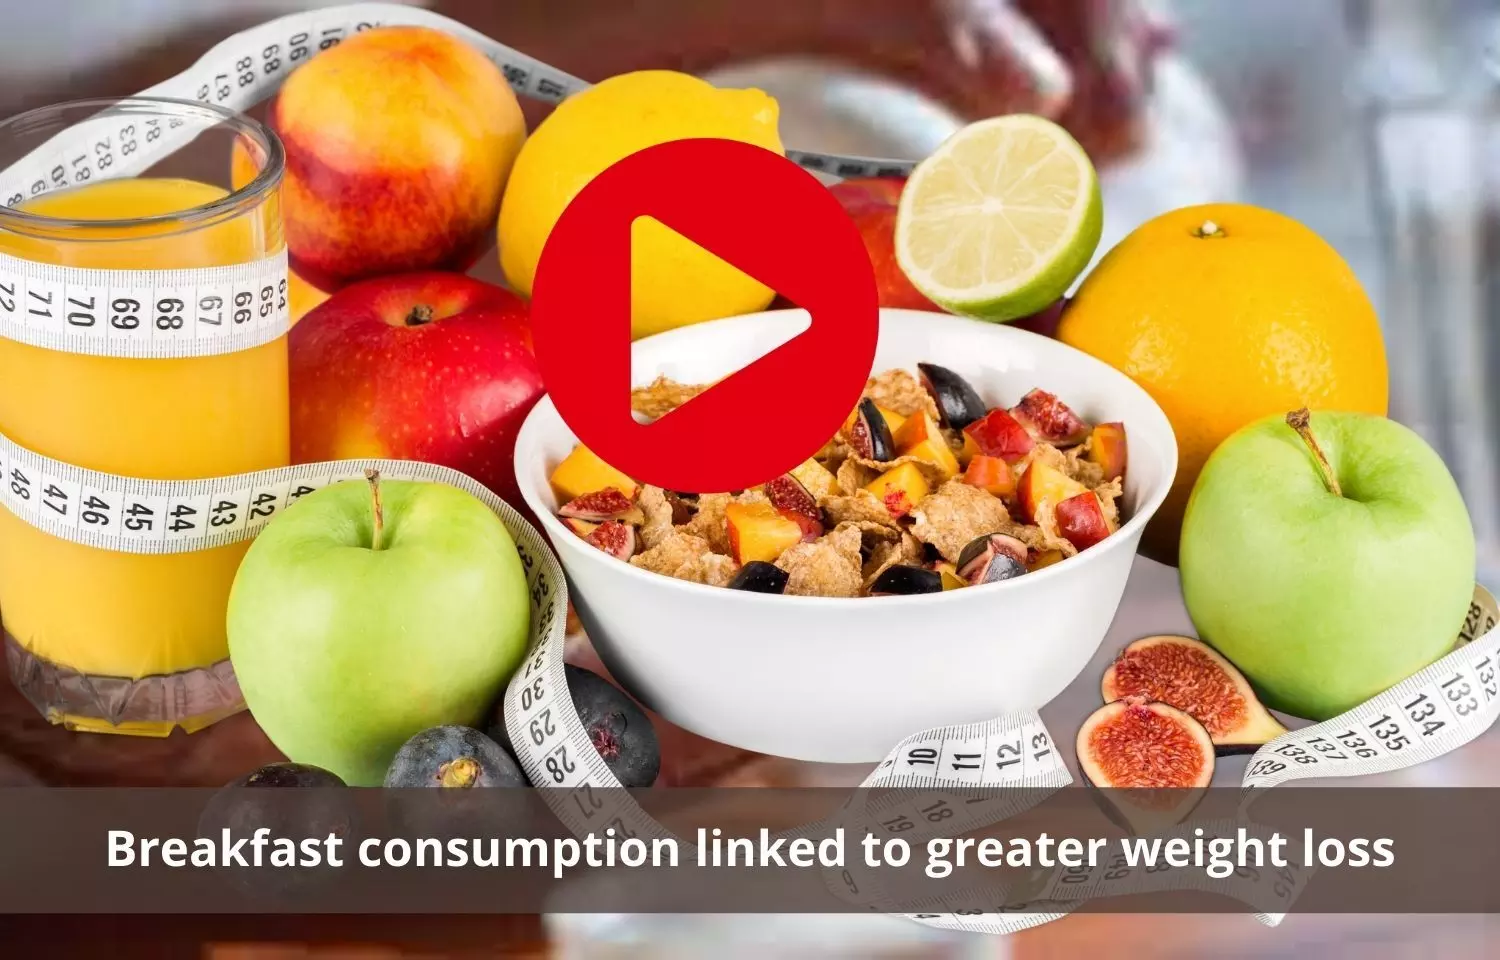 Breakfast consumption to help reduce weight in adults